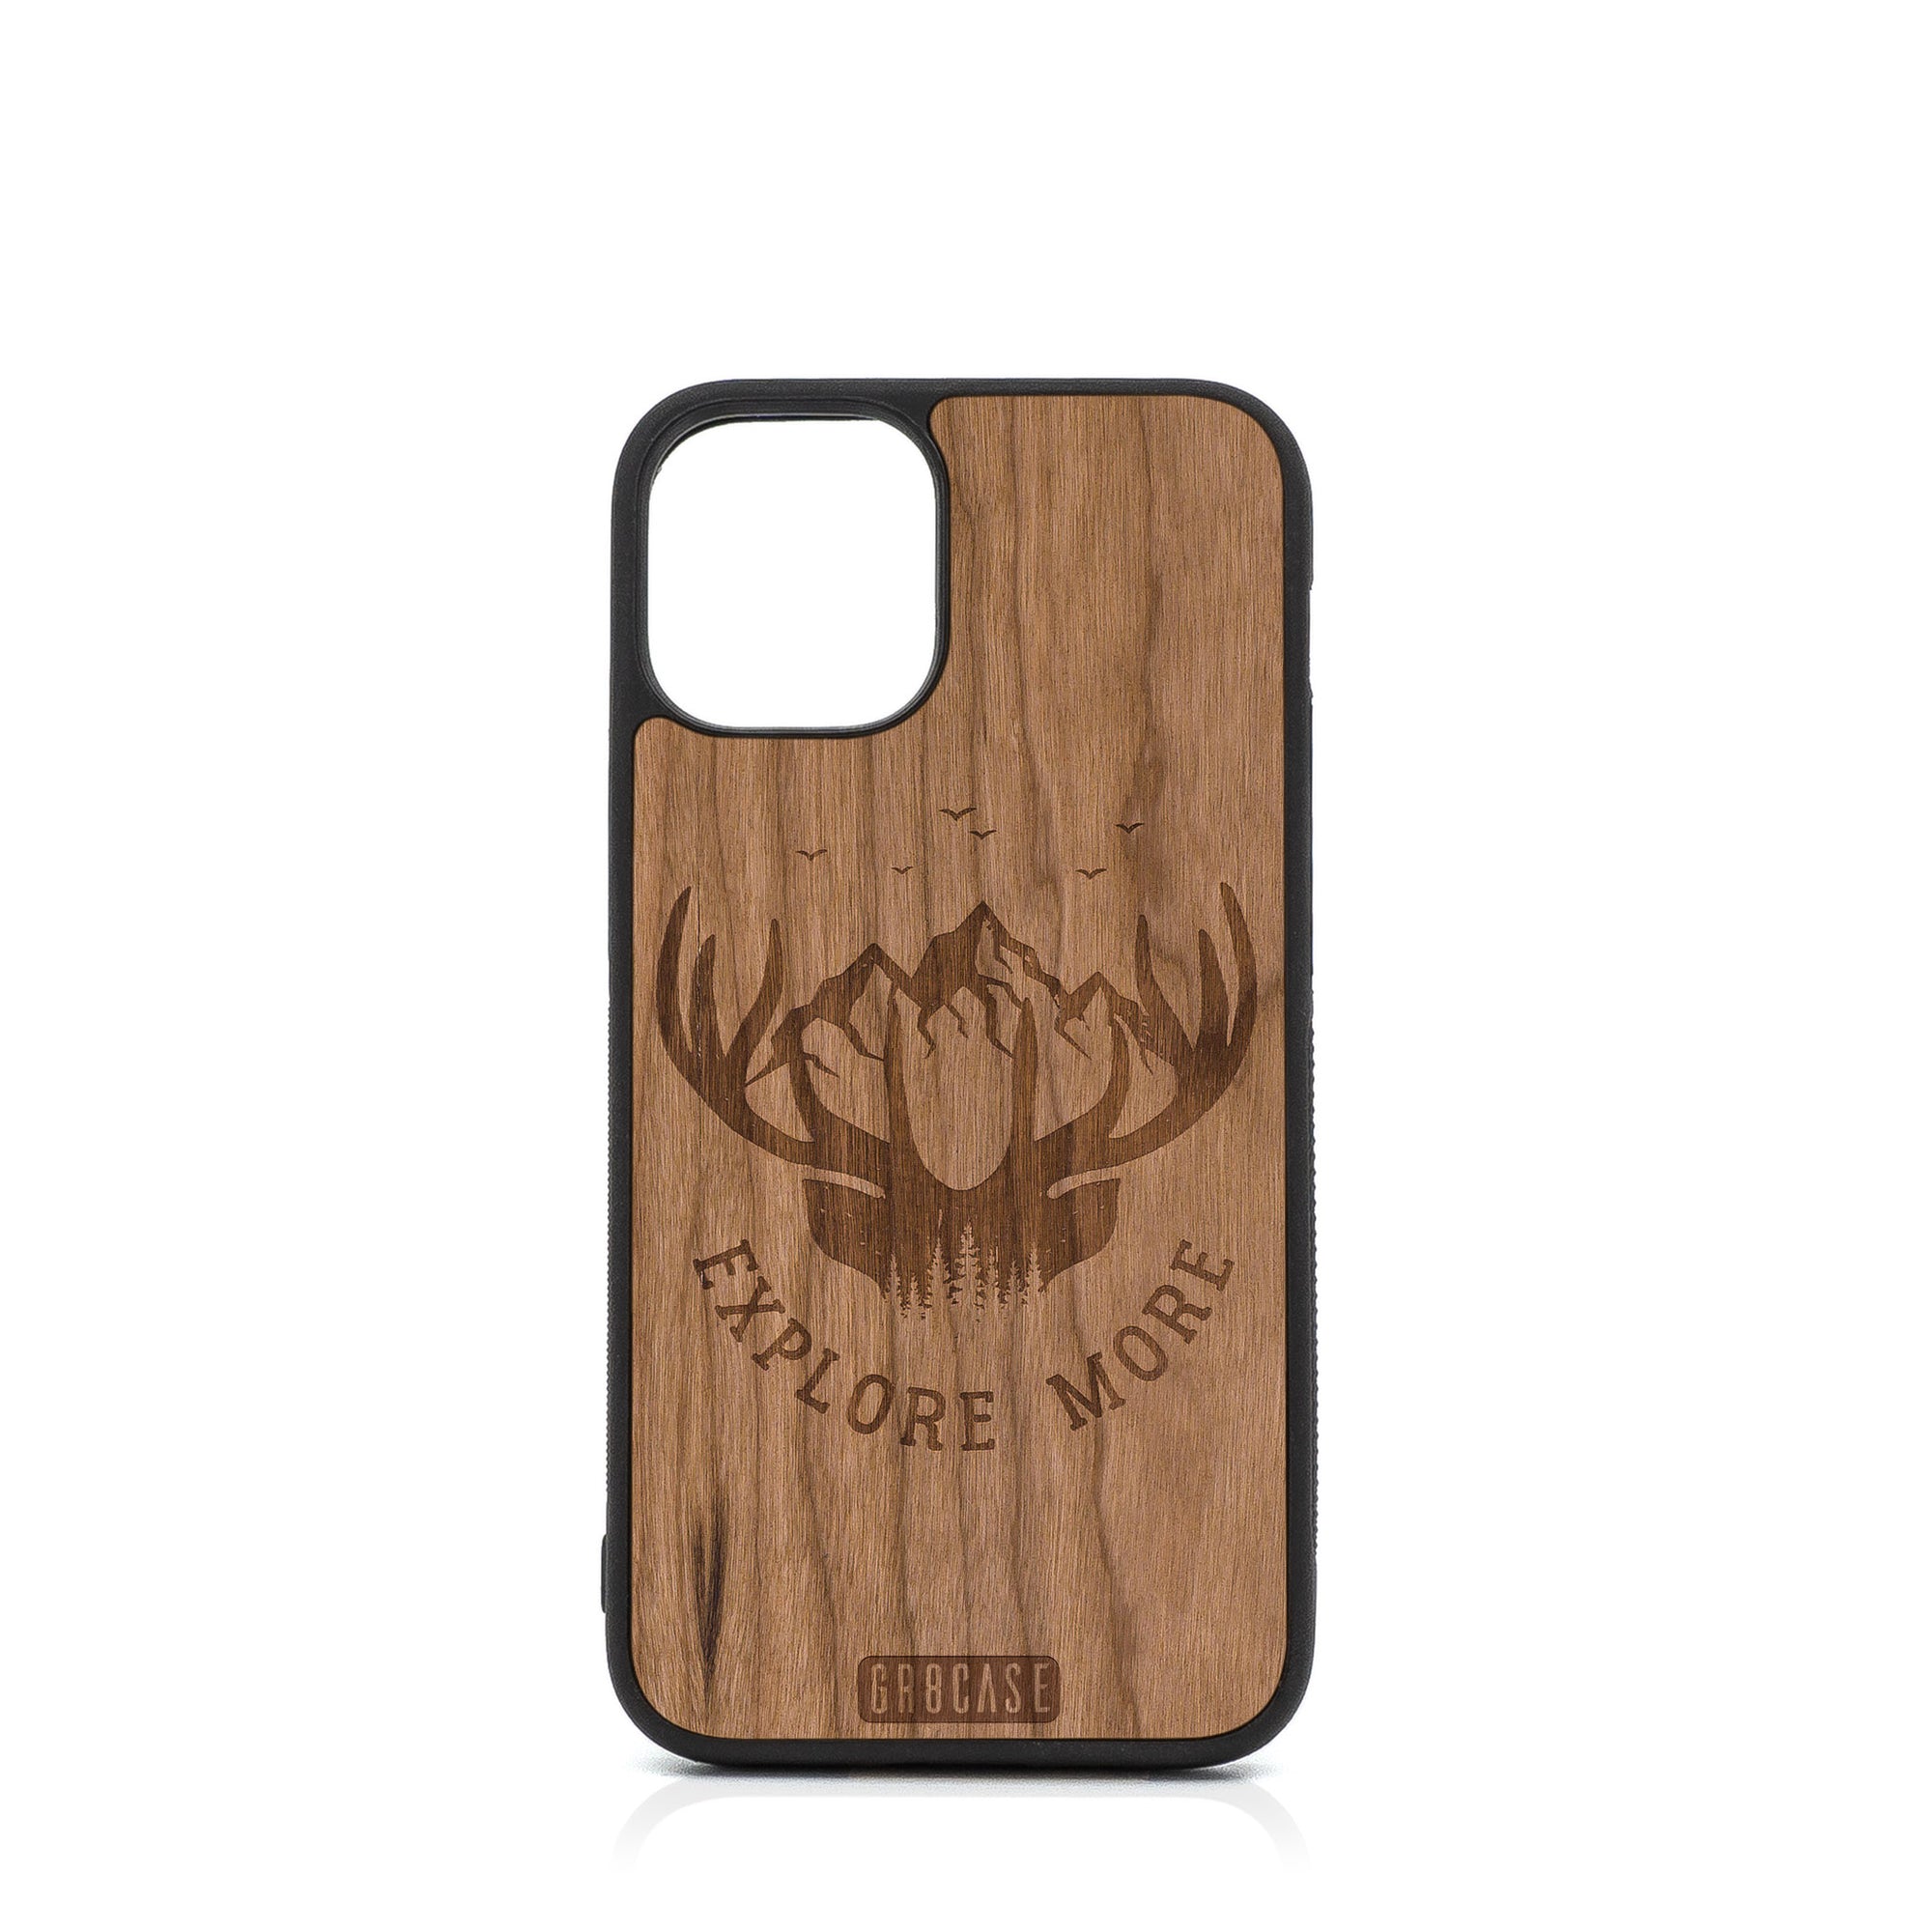 Explore More (Mountain & Antlers) Design Wood Case For iPhone 12 Mini